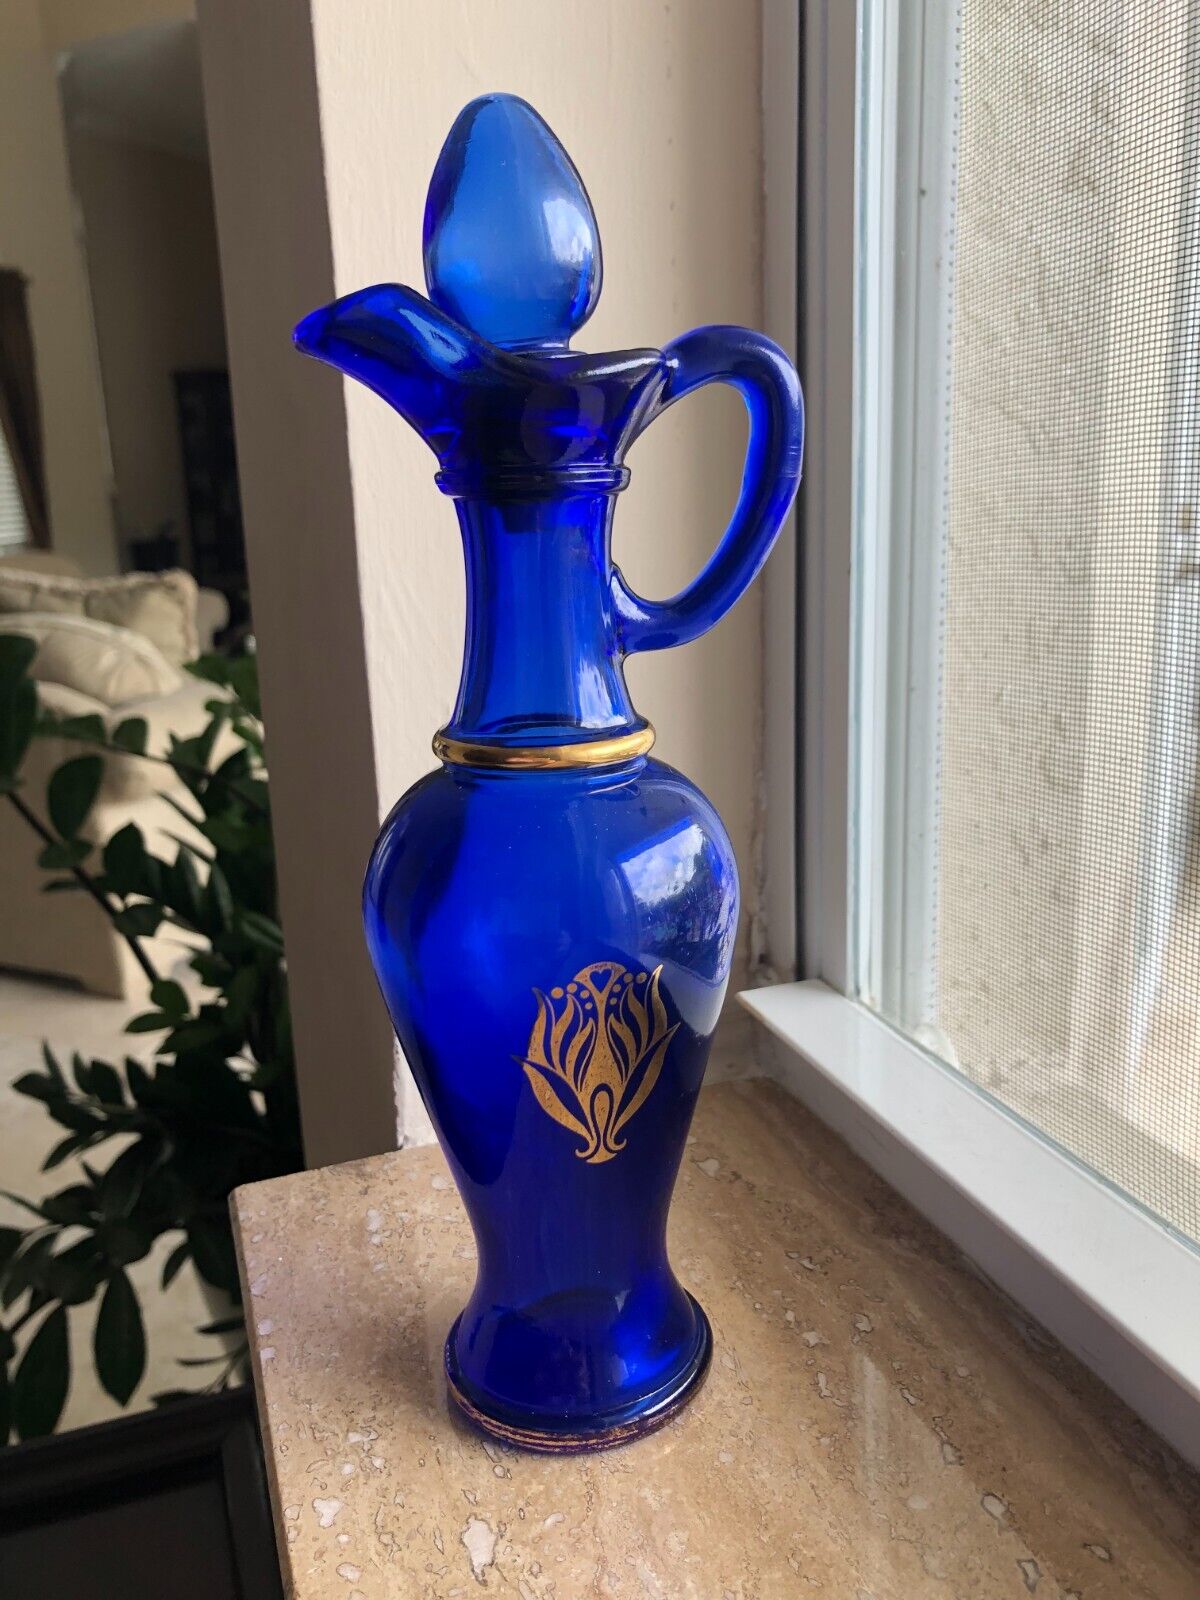 AVON Cobalt Blue Glass Decanter Bottle with Glass Top a Rare Vintage Collectible